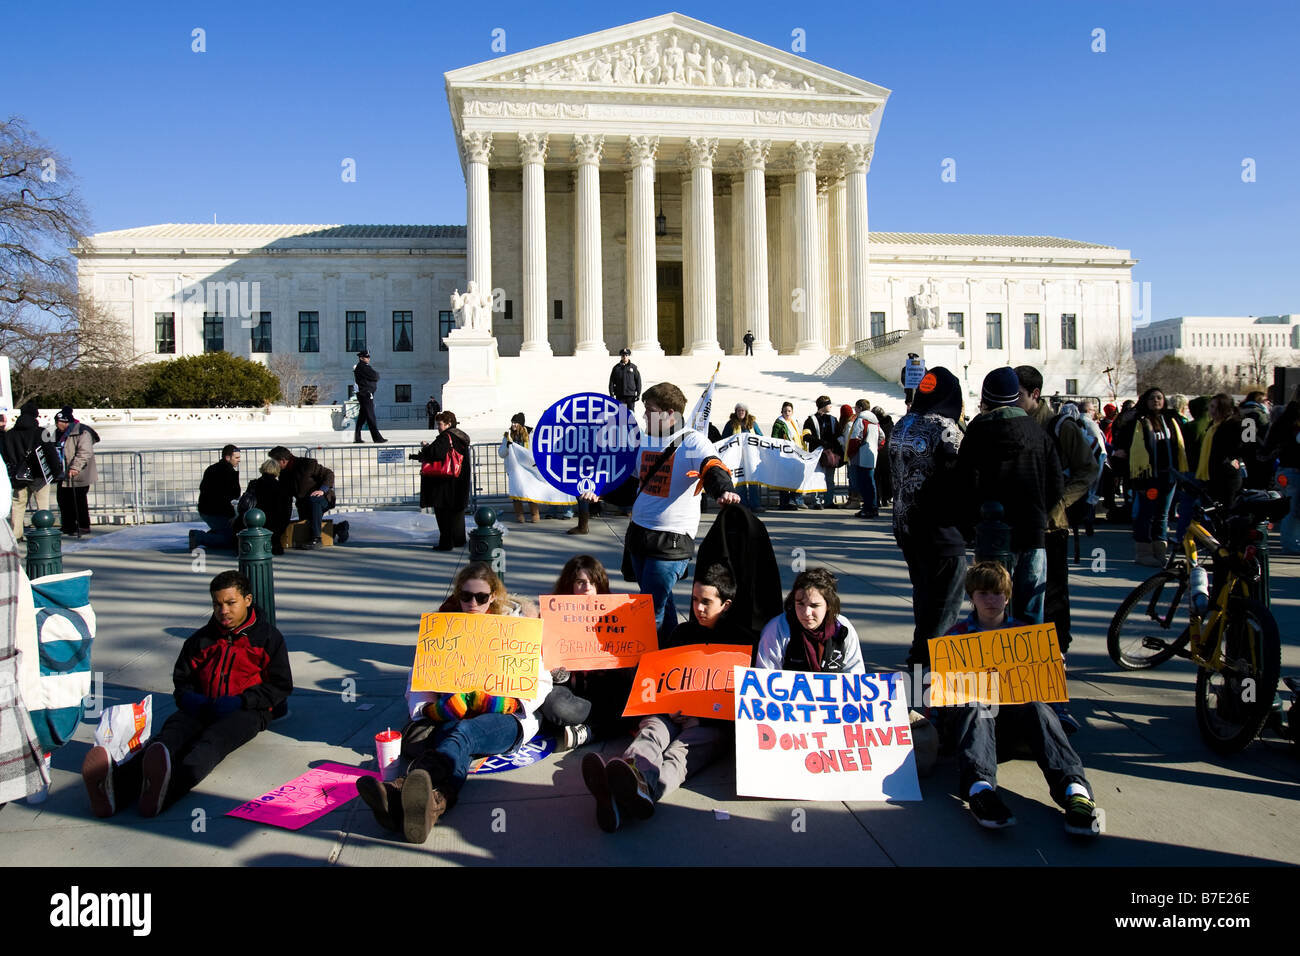 Pro-Choice supporters hold signs in front of the US Supreme Court - March for Life Rally, 2009 - Washington, DC USA Stock Photo